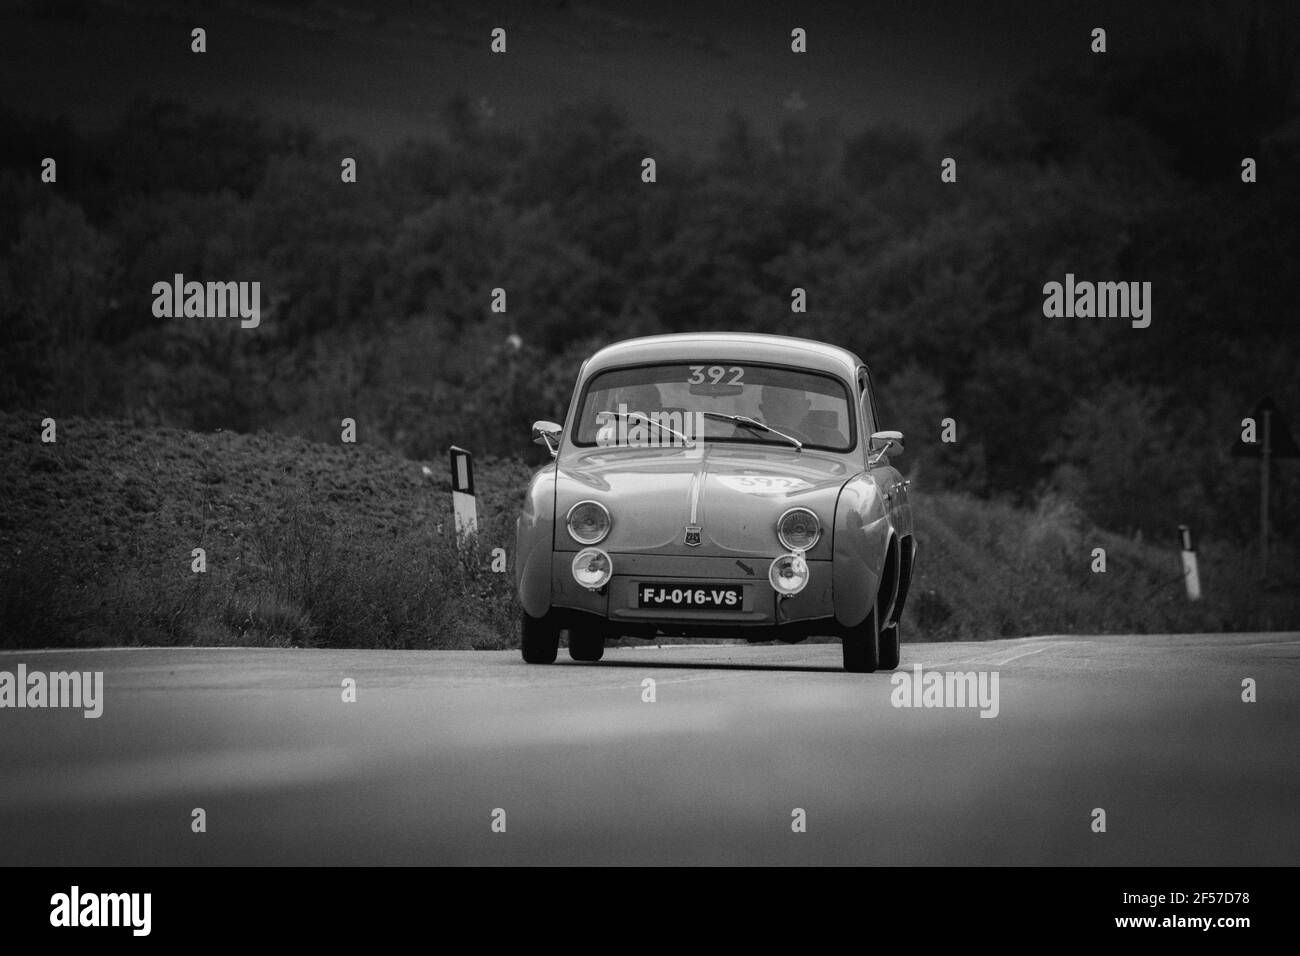 CAGLI , ITALY - OTT 24 - 2020 : RENAULT DAUPHINE 1957 on an old racing car in rally Mille Miglia 2020 the famous italian historical race (1927-1957 Stock Photo